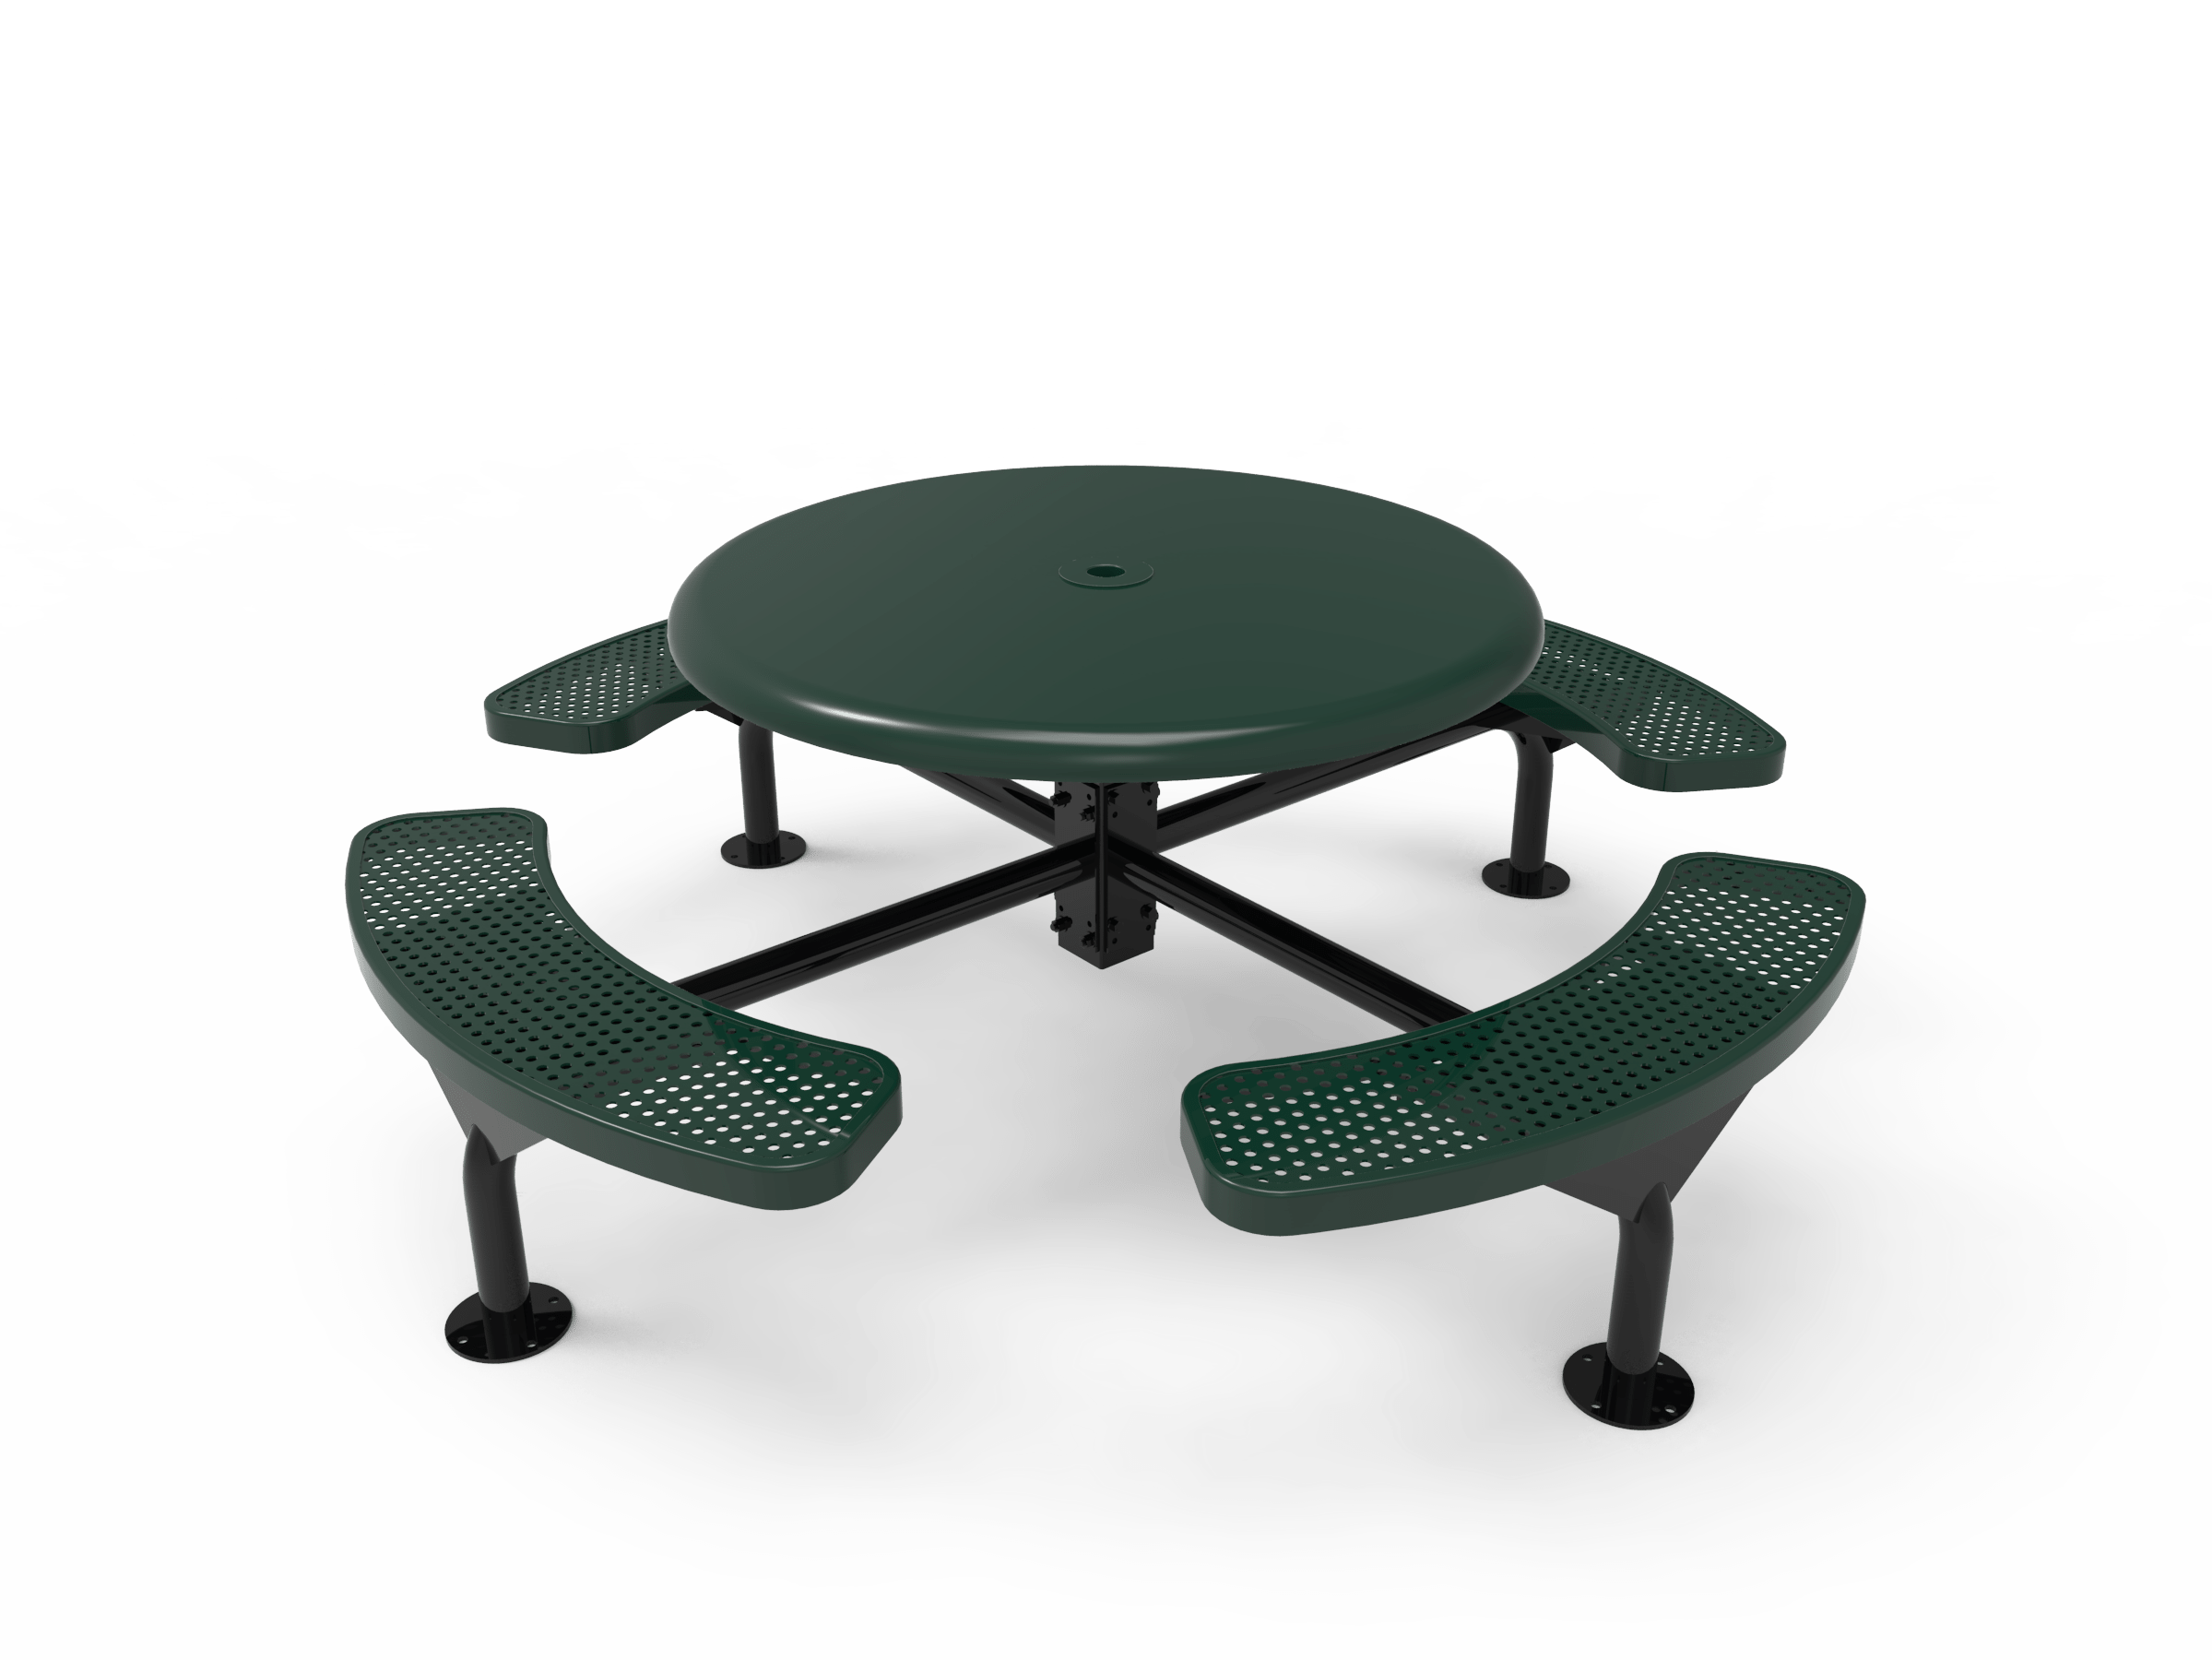 46″ Round Solid Top Nexus Surface Table With 4 Seats-Punched
TRS46-D-48-000
Industry Standard Finish
$1909.00
TRS46-B-48-000
Advantage Premium Finish
$2409.00
